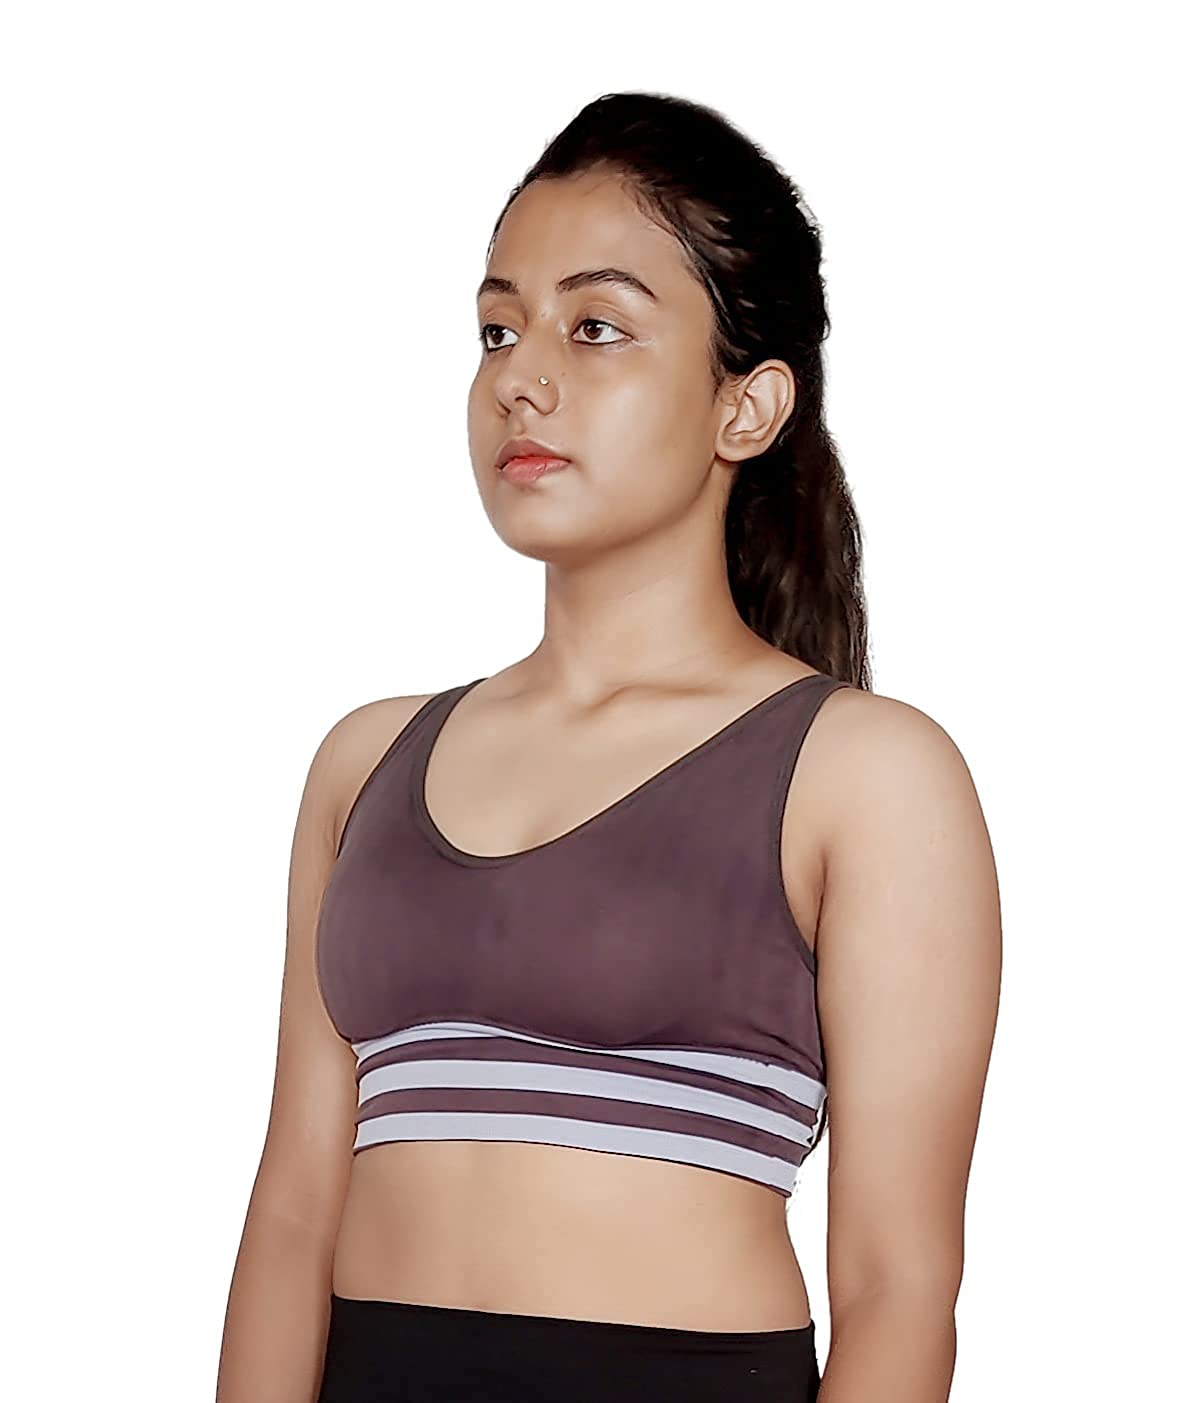 Women/Girl's Sports Bra. (Free Size Fits 28 to 34B) Removable Pads - Light  Weight, Soft & Stretchable - Za